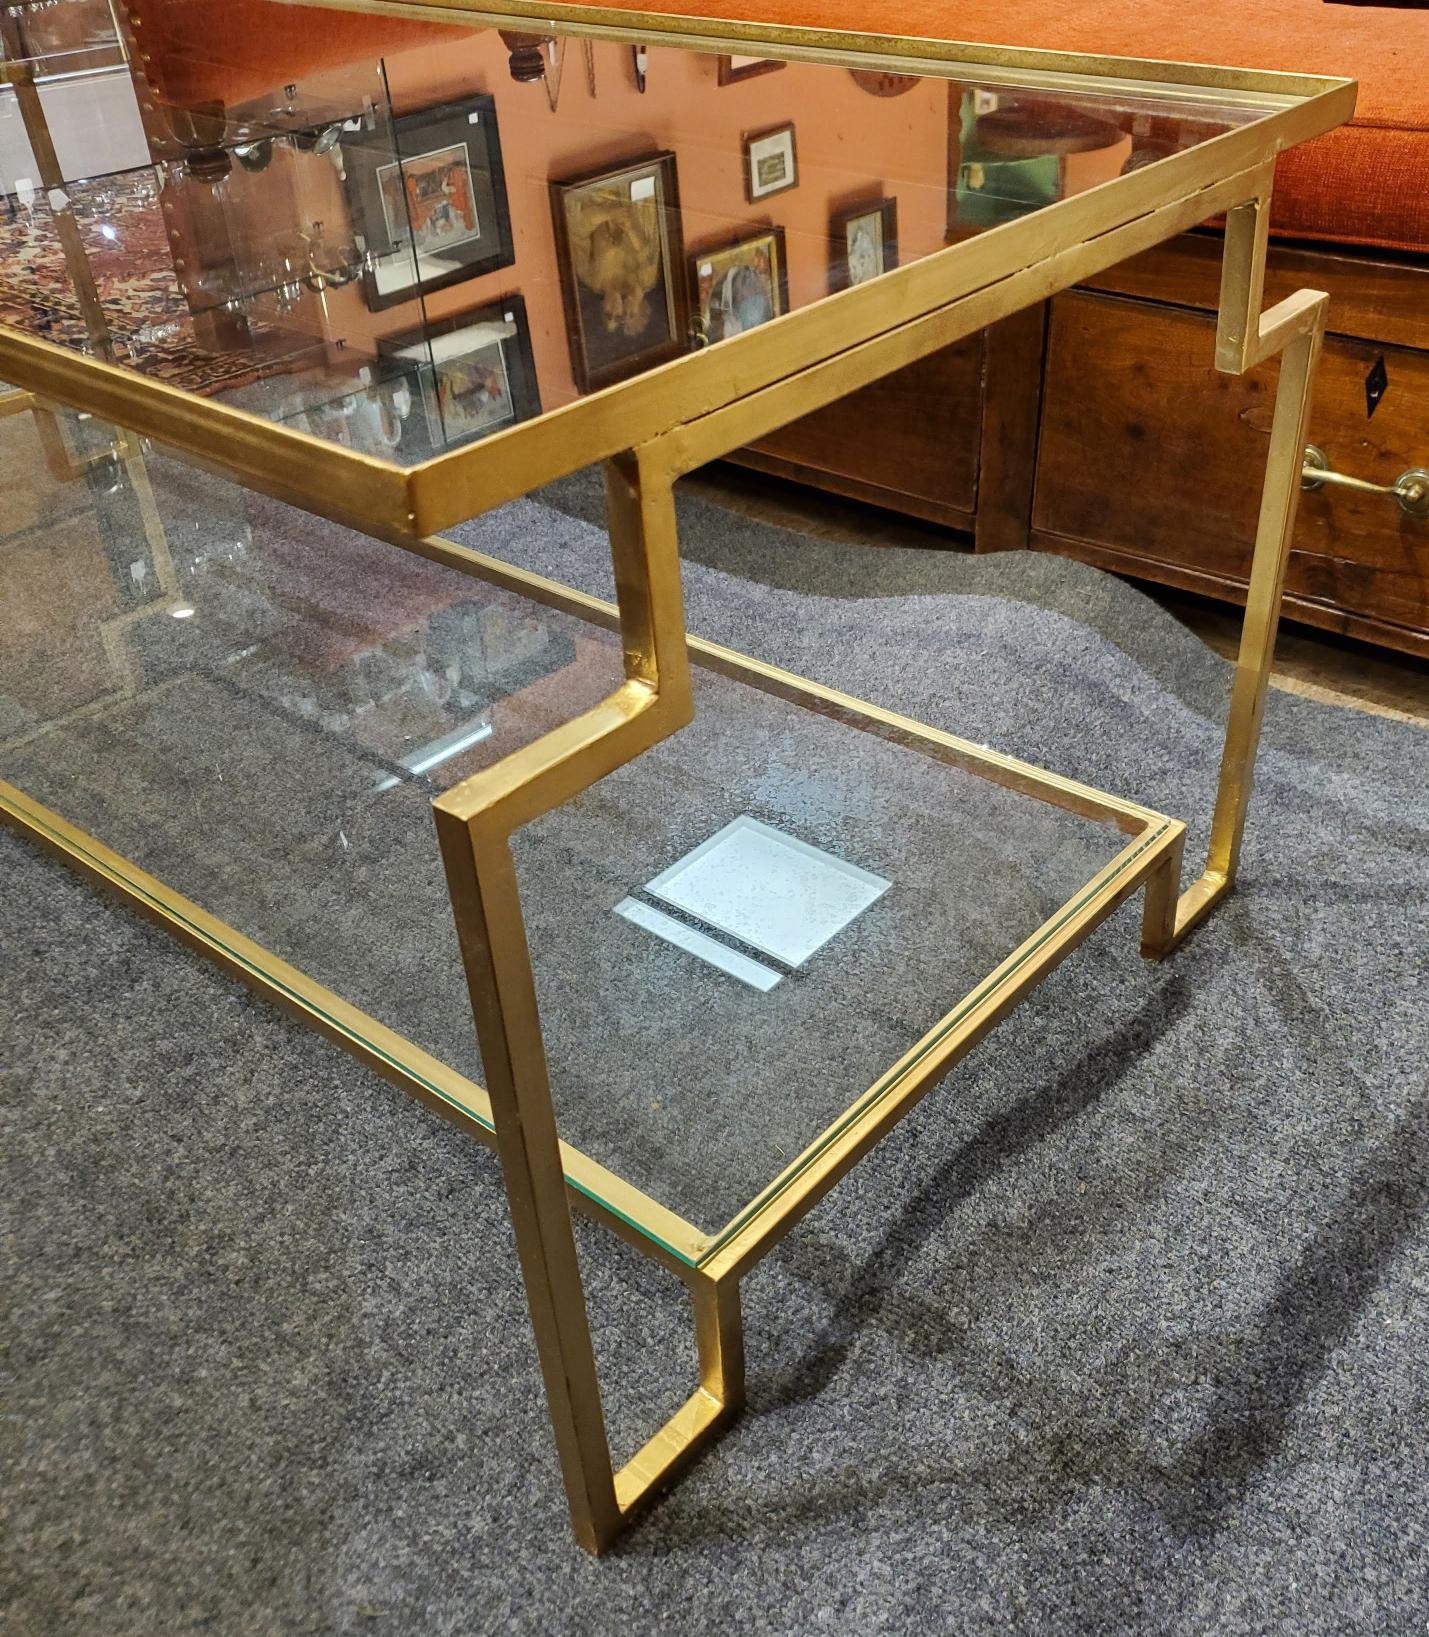 Post Modern Style “Apollo” Gilt Metal Coffee Table with Glass Top & Bottom Shelf In New Condition For Sale In Middleburg, VA